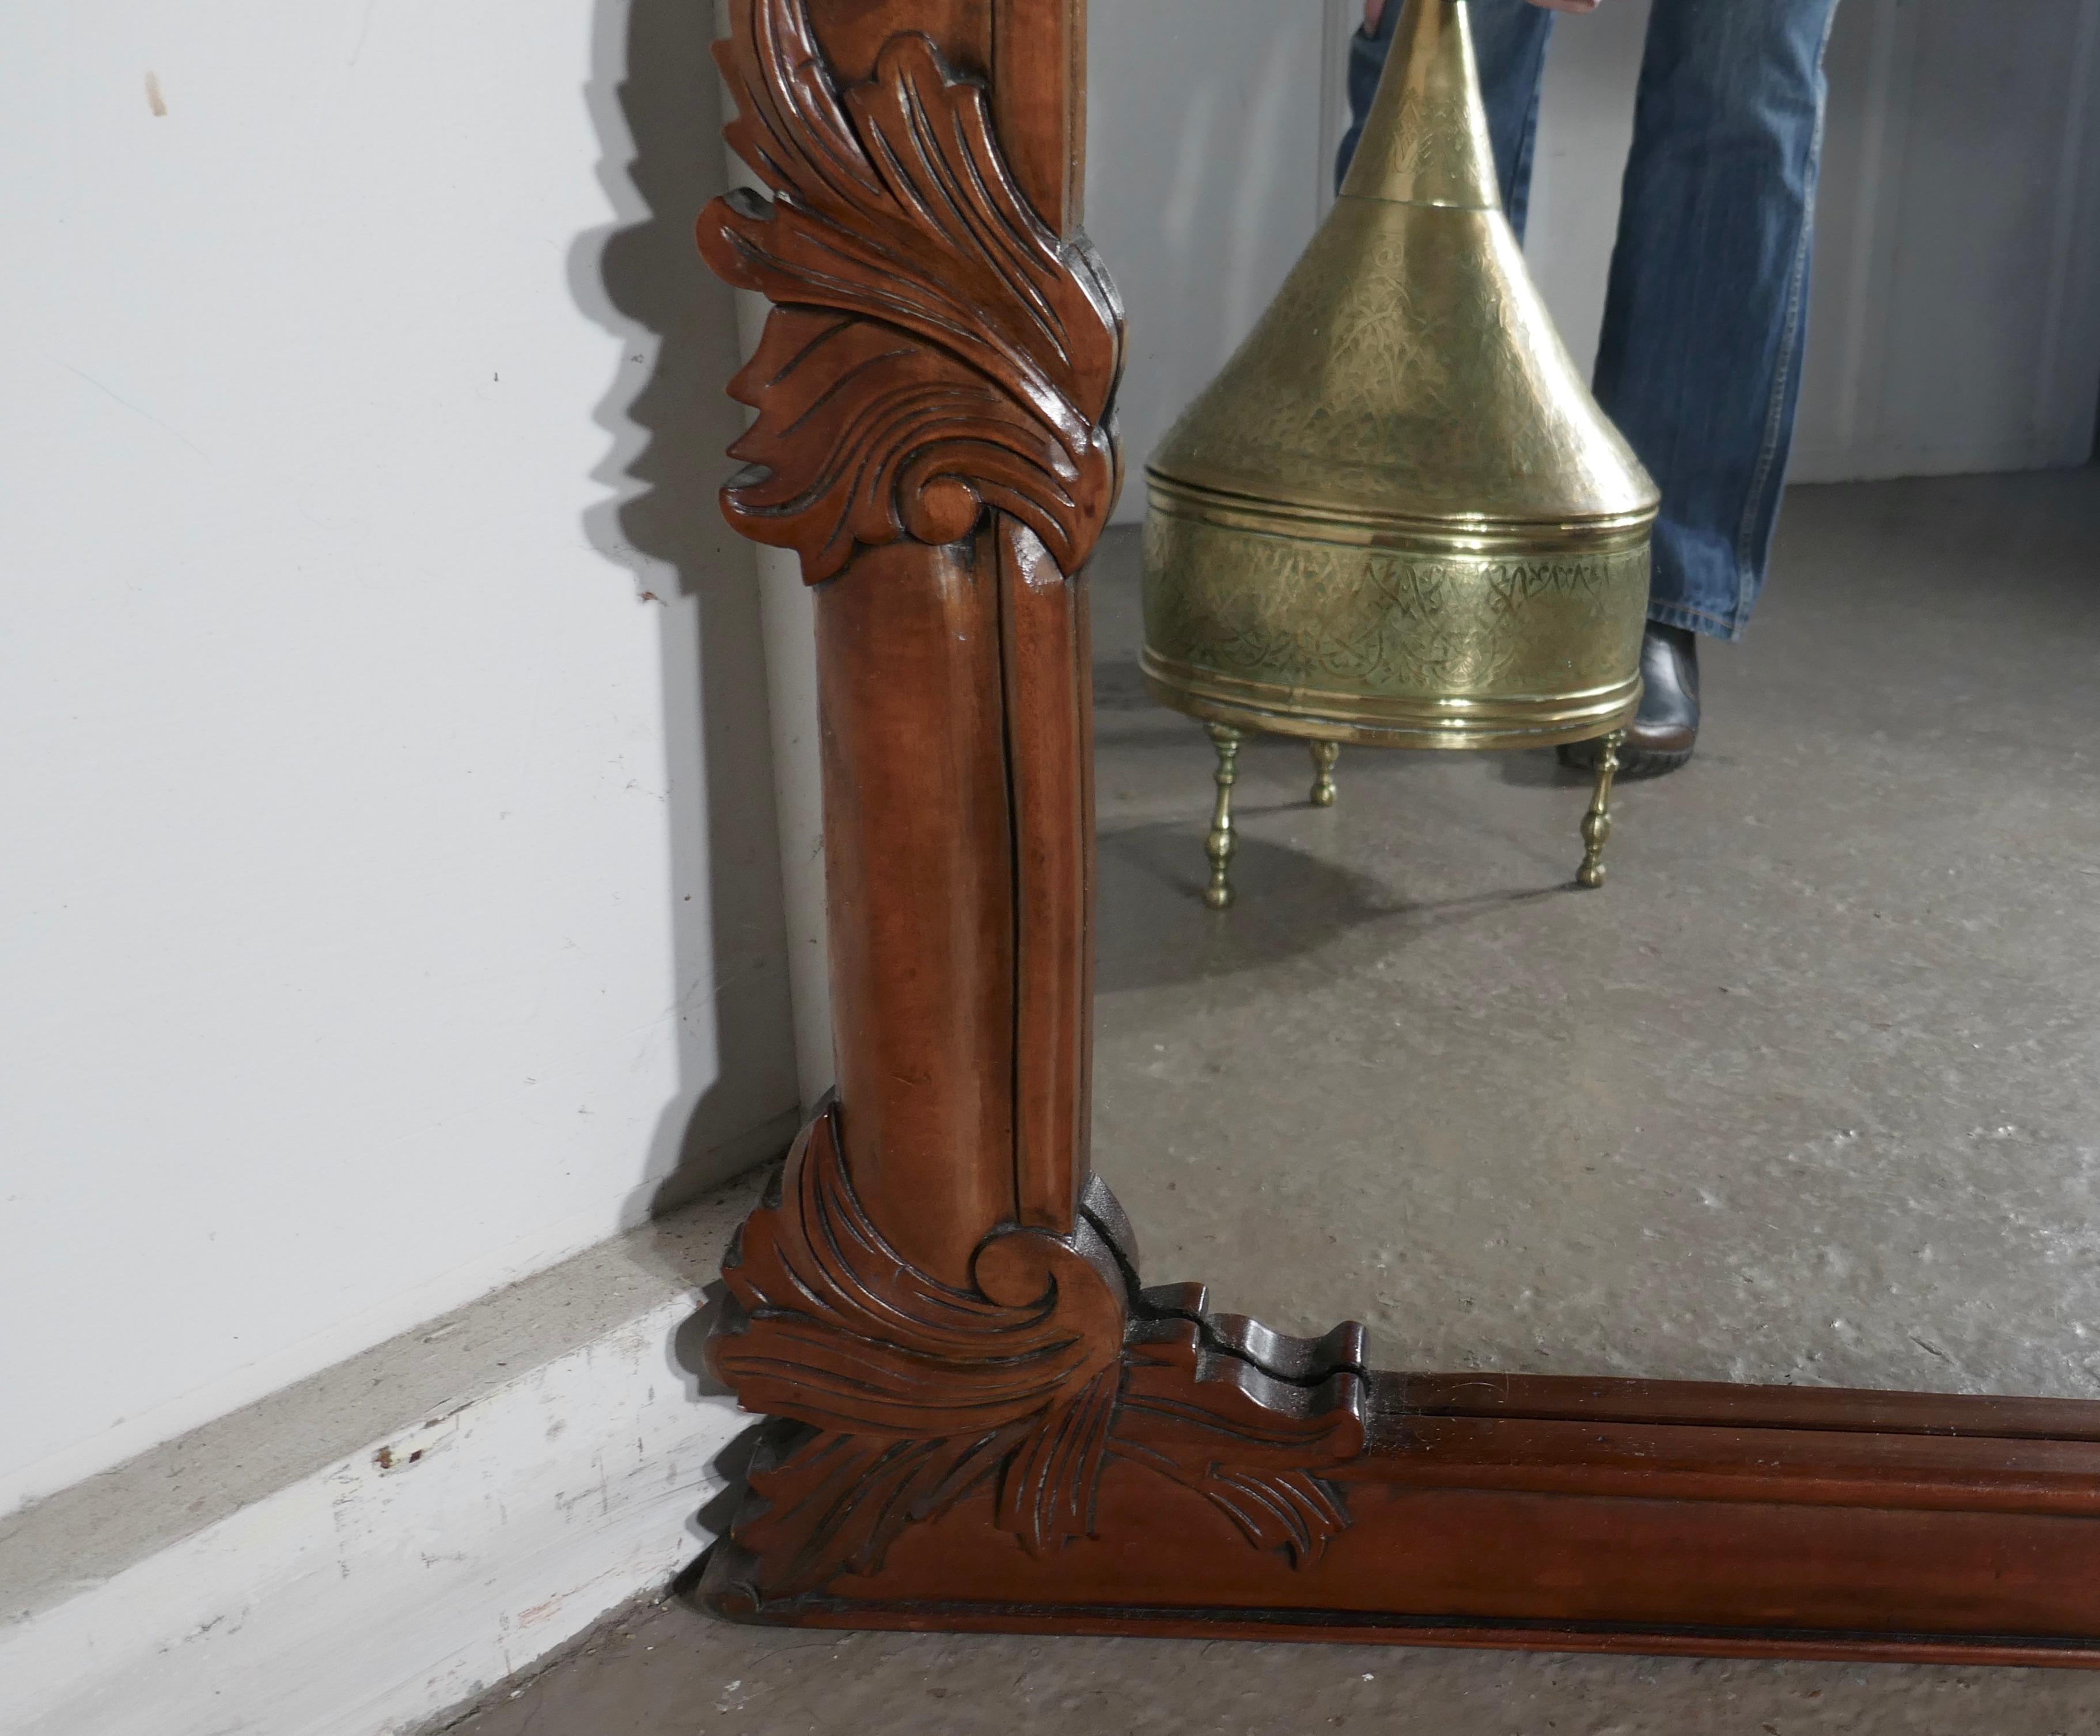 A superb large carved mahogany overmantel mirror

This is a striking piece it has a rectangular shape carved with entwined leaves and swags carved on both sides and over the top
The mirror is in lovely red Mahogany and would set off the